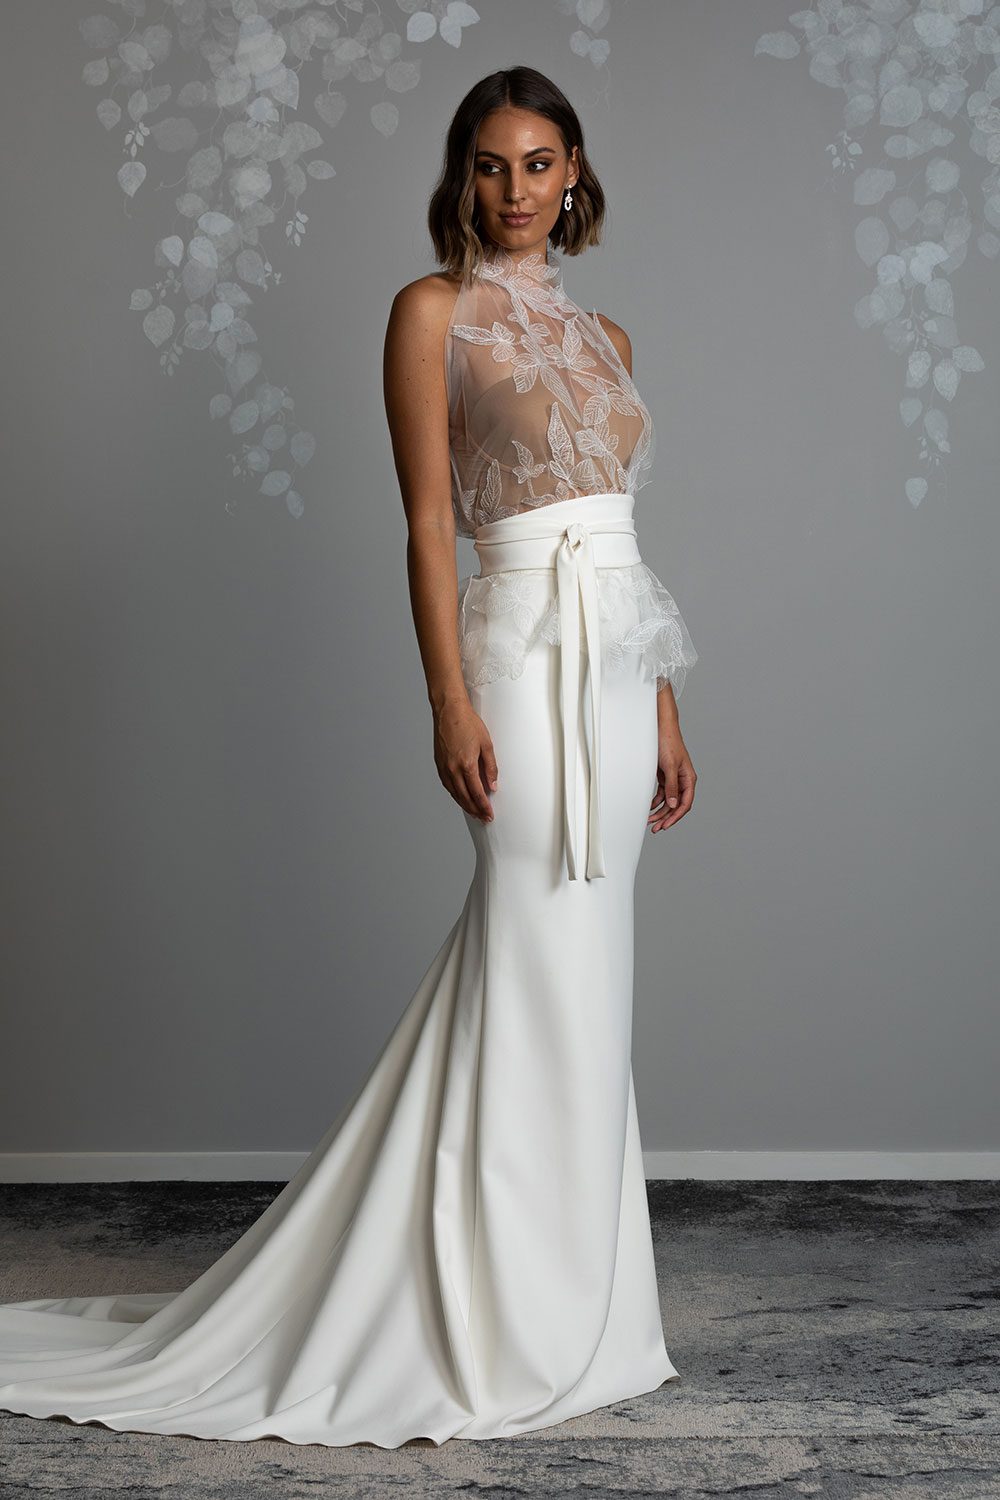 Mio Wedding Dress from Vinka Design. The front detail of gown with a high necked delicately hand-embroidered leaf lace cinched in at the waist with a wide kimono belt with skirt. Model wearing high necked leaf lace tulle bodice with kimono belt, and skirt with long train